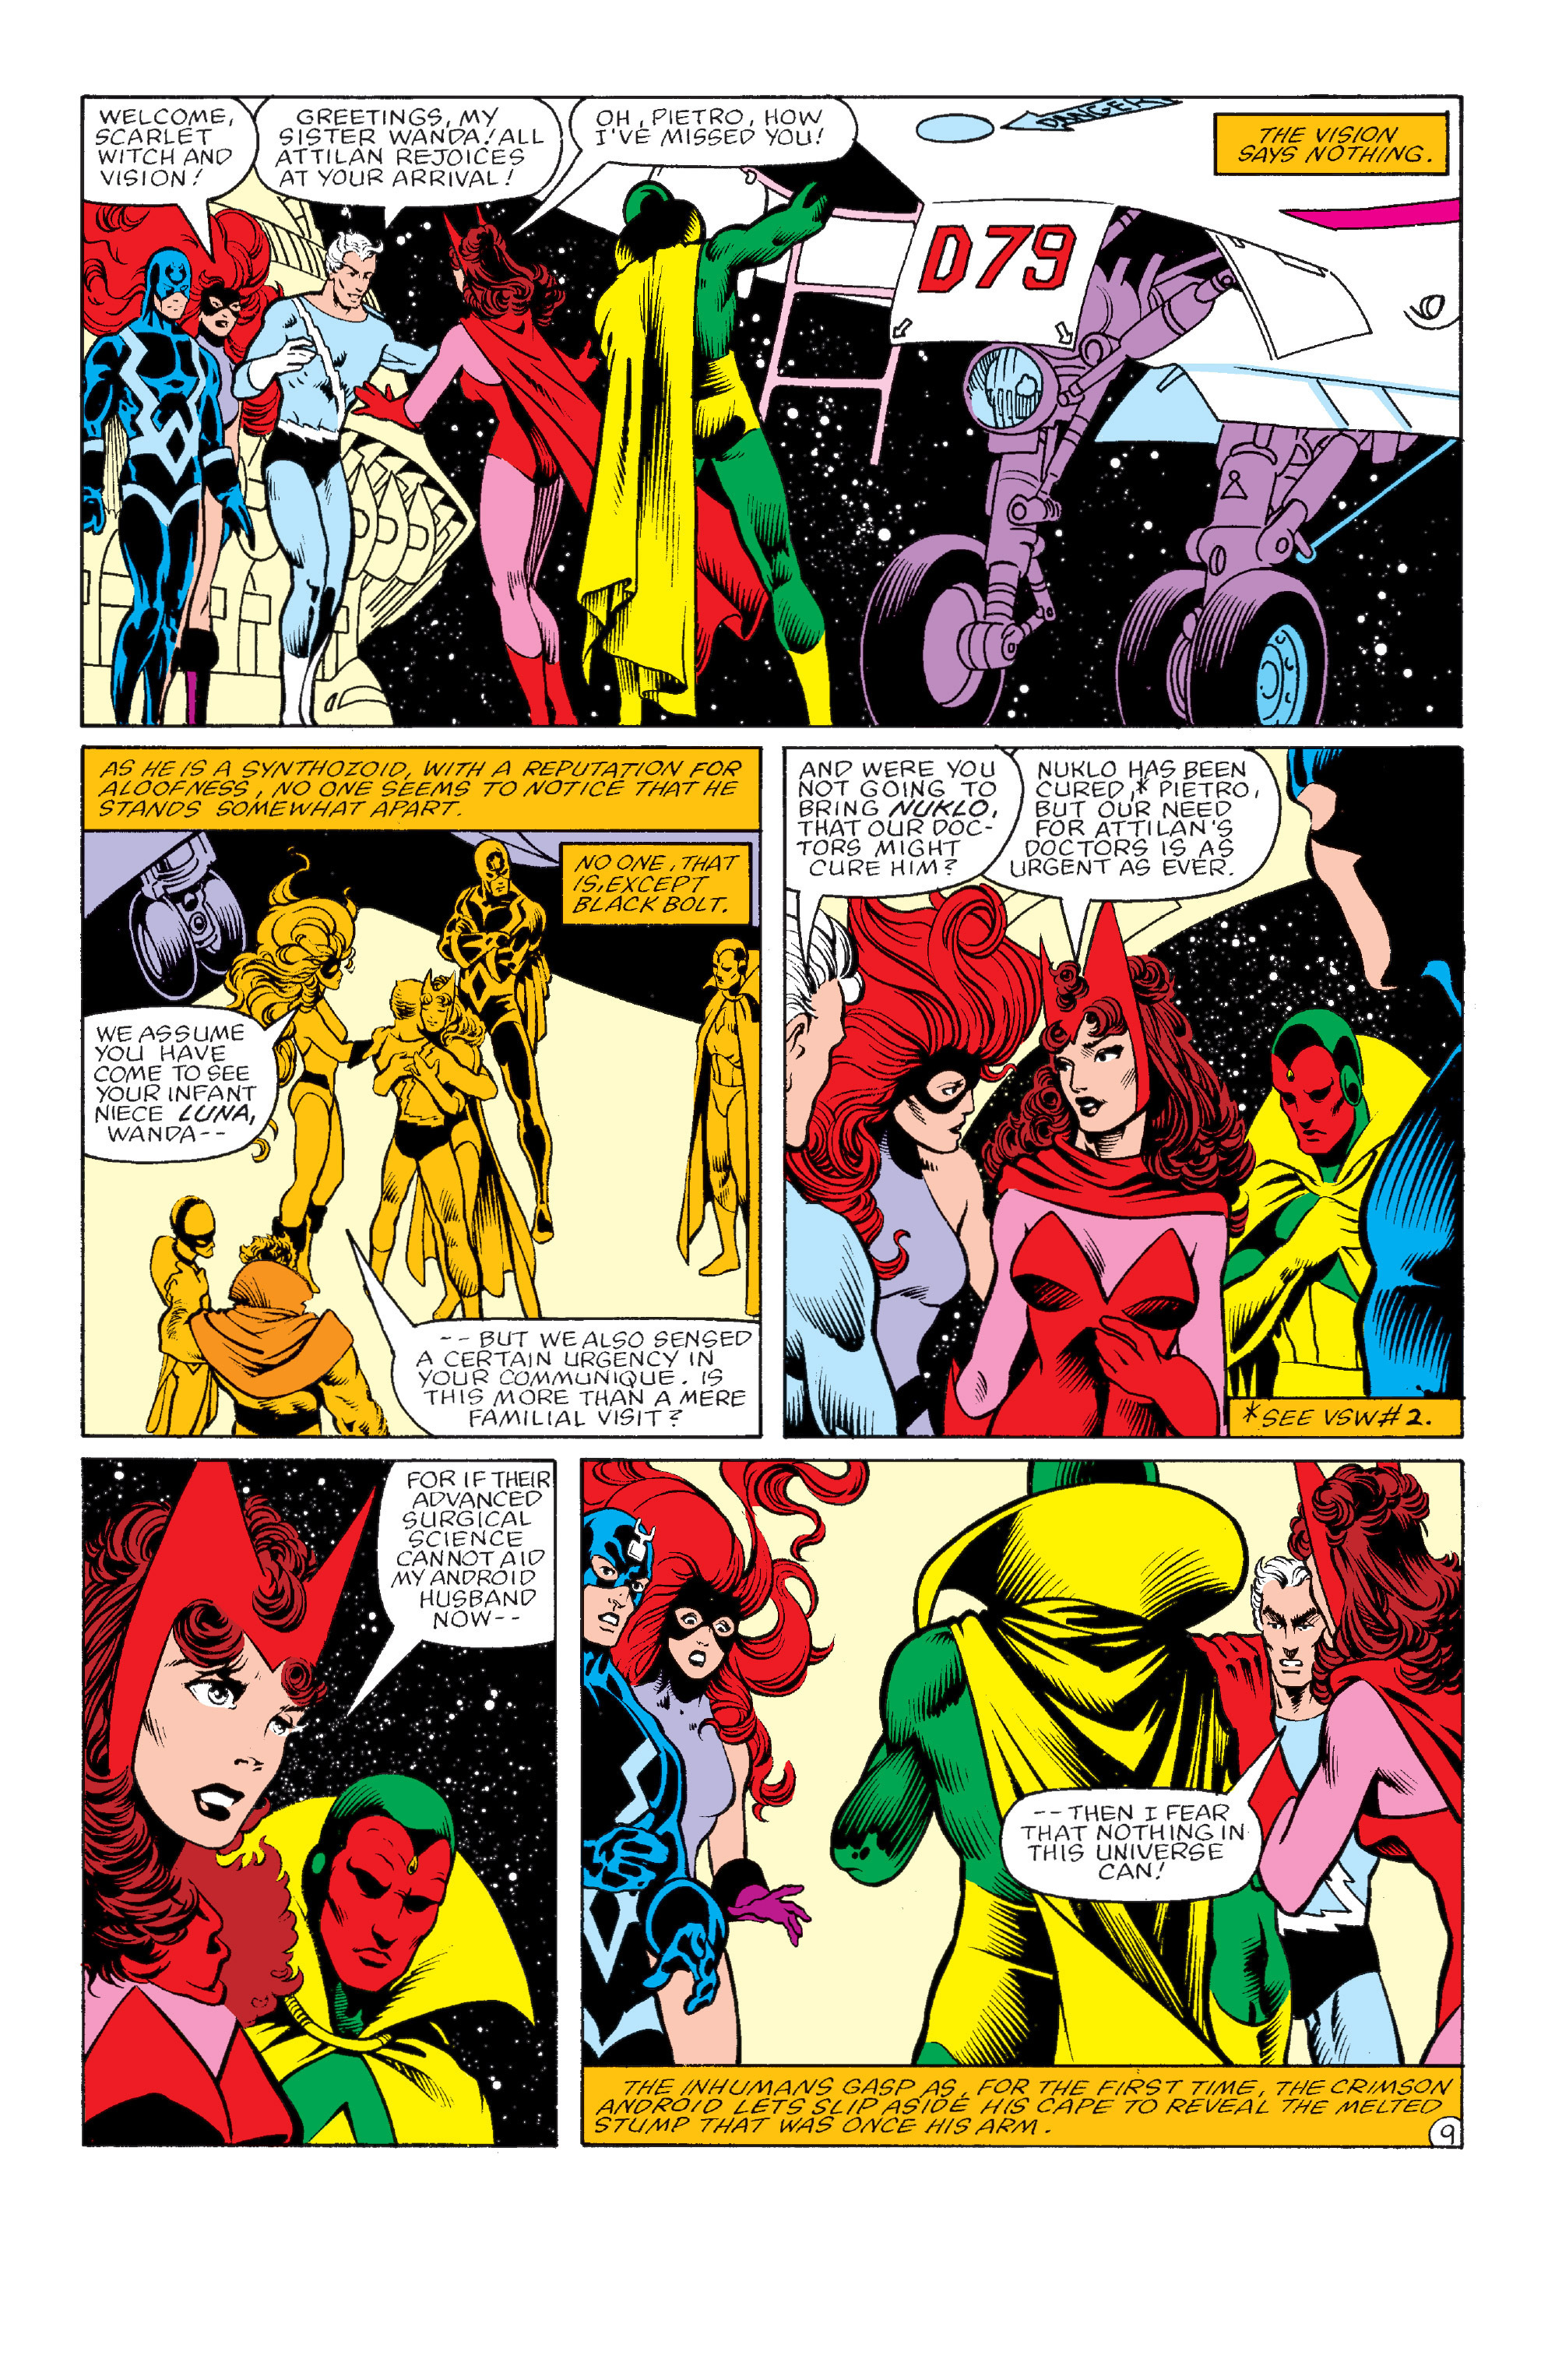 Vision And The Scarlet Witch V1 4  Read Vision And The Scarlet Witch V1 4  comic online in high quality. Read Full Comic online for free - Read comics  online in